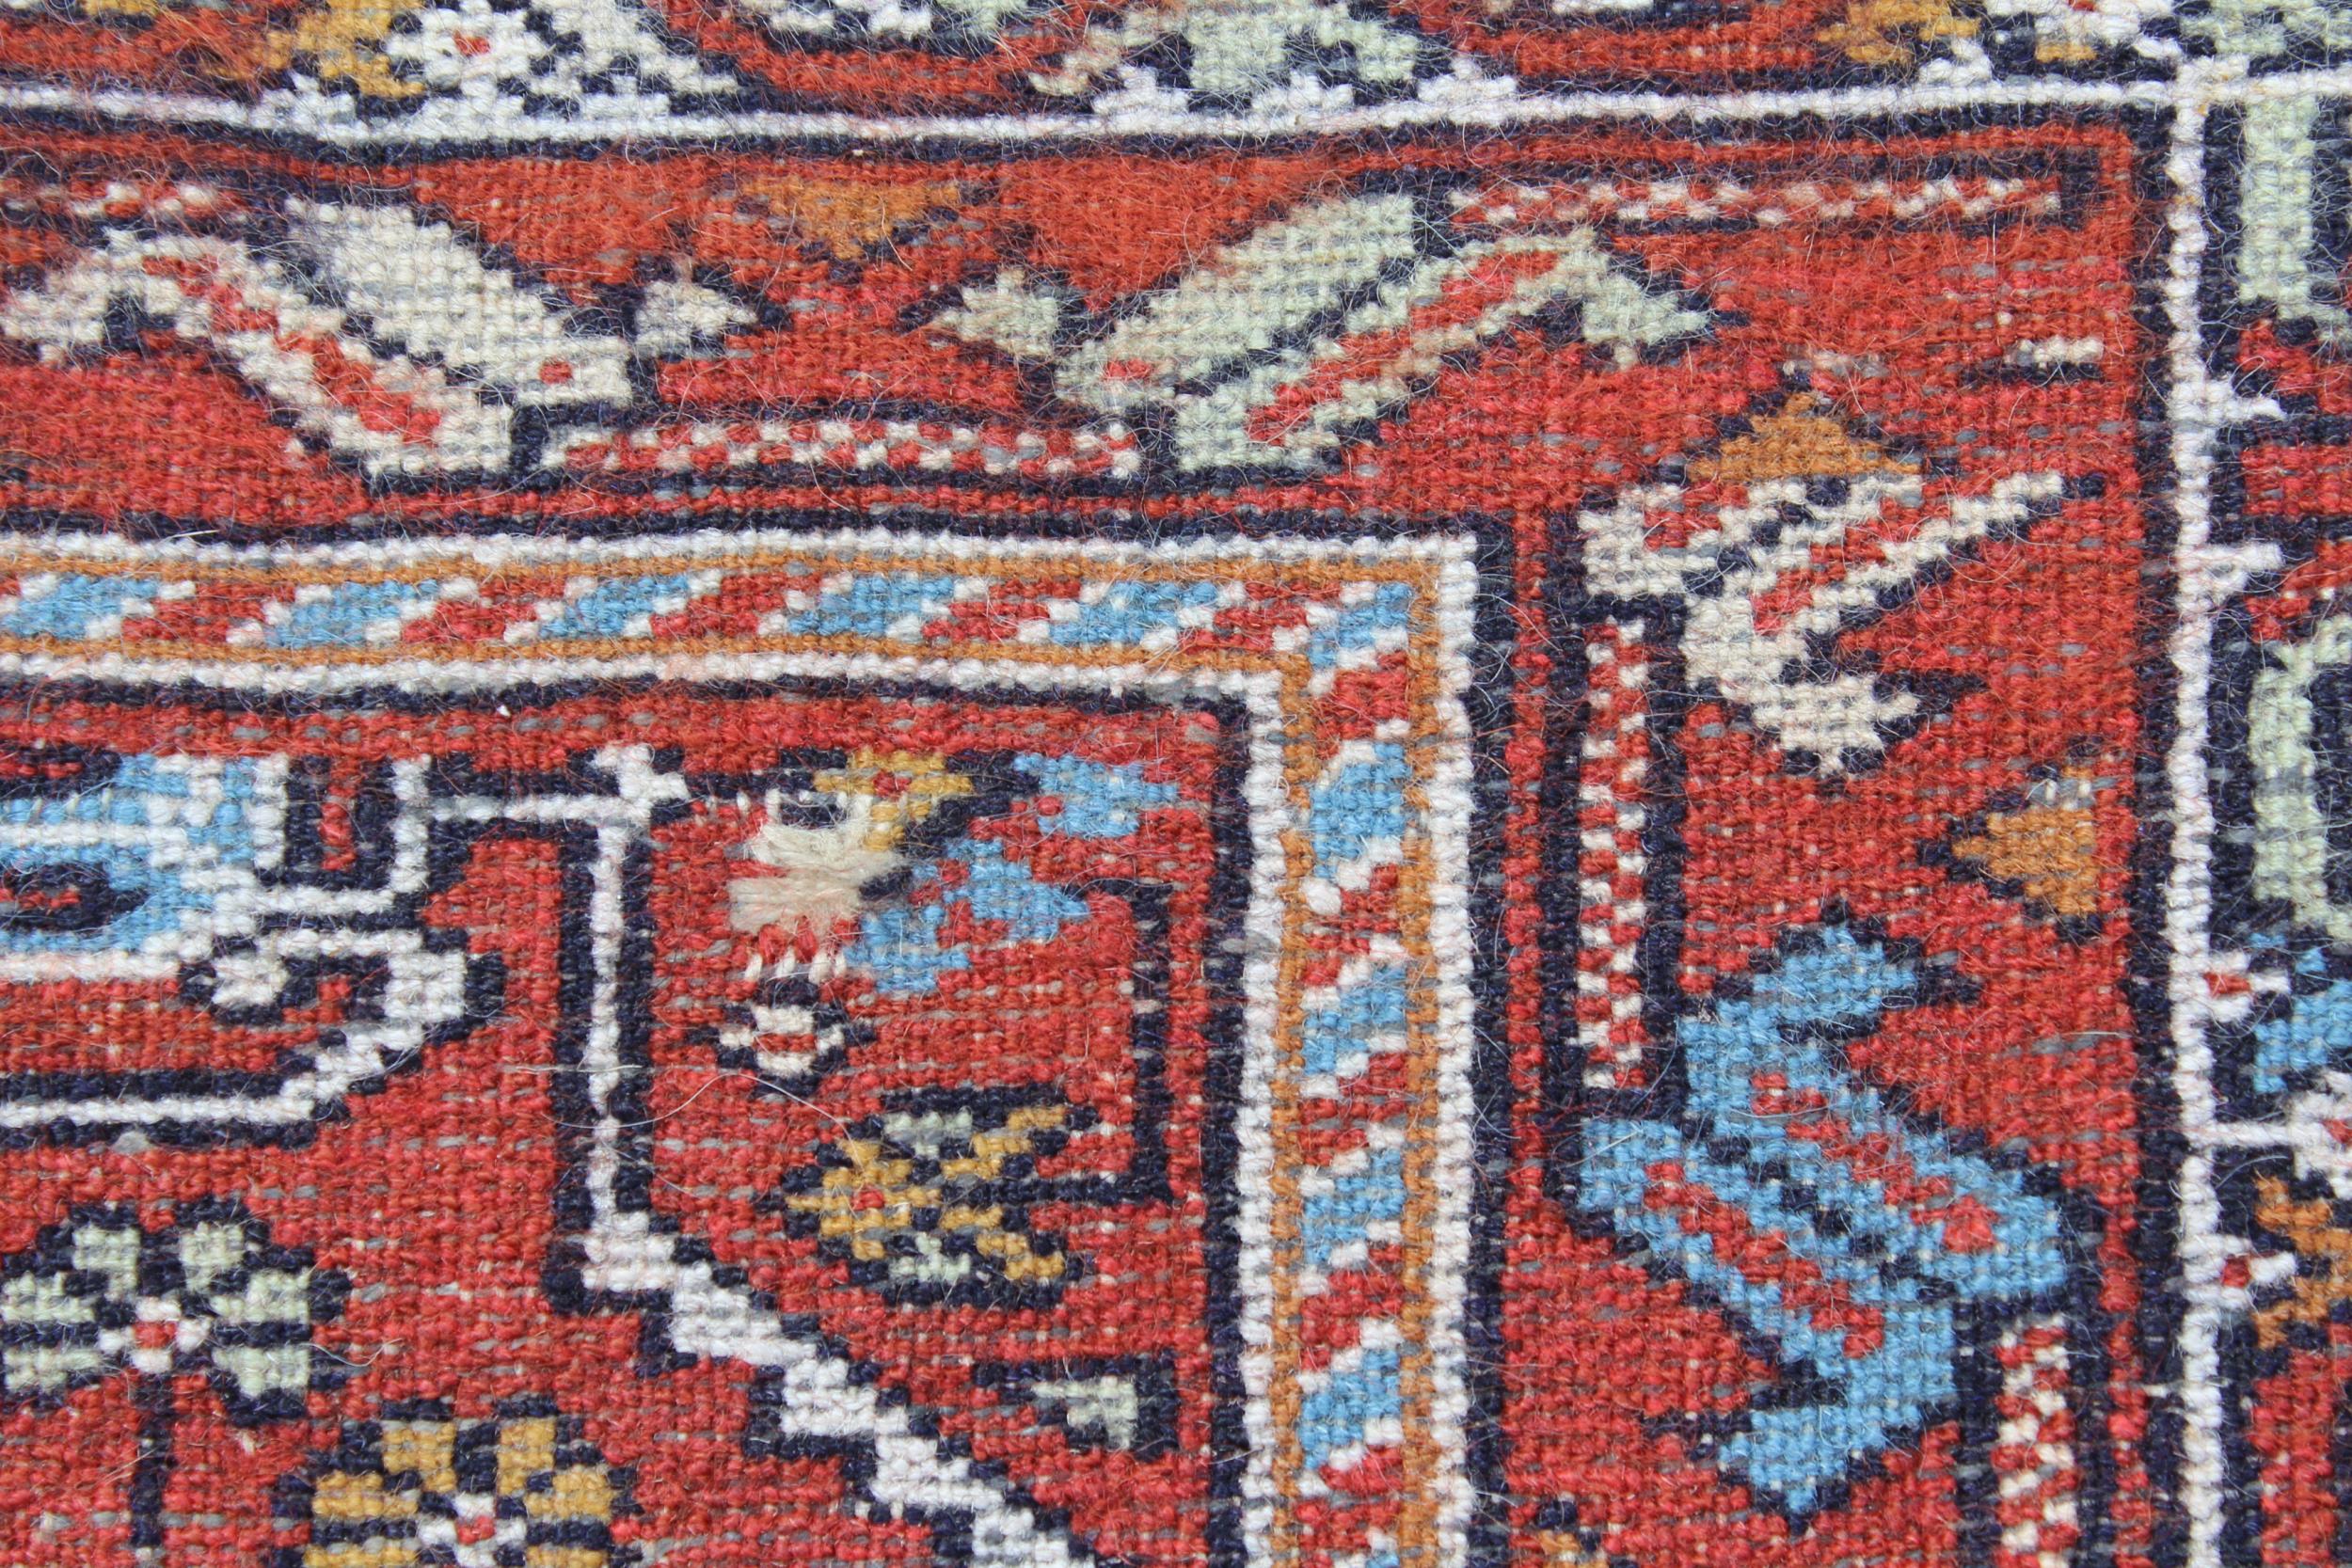 Indo Persian runner of Afghan design with a repeating hooked medallion pattern, on a rose ground - Image 4 of 6